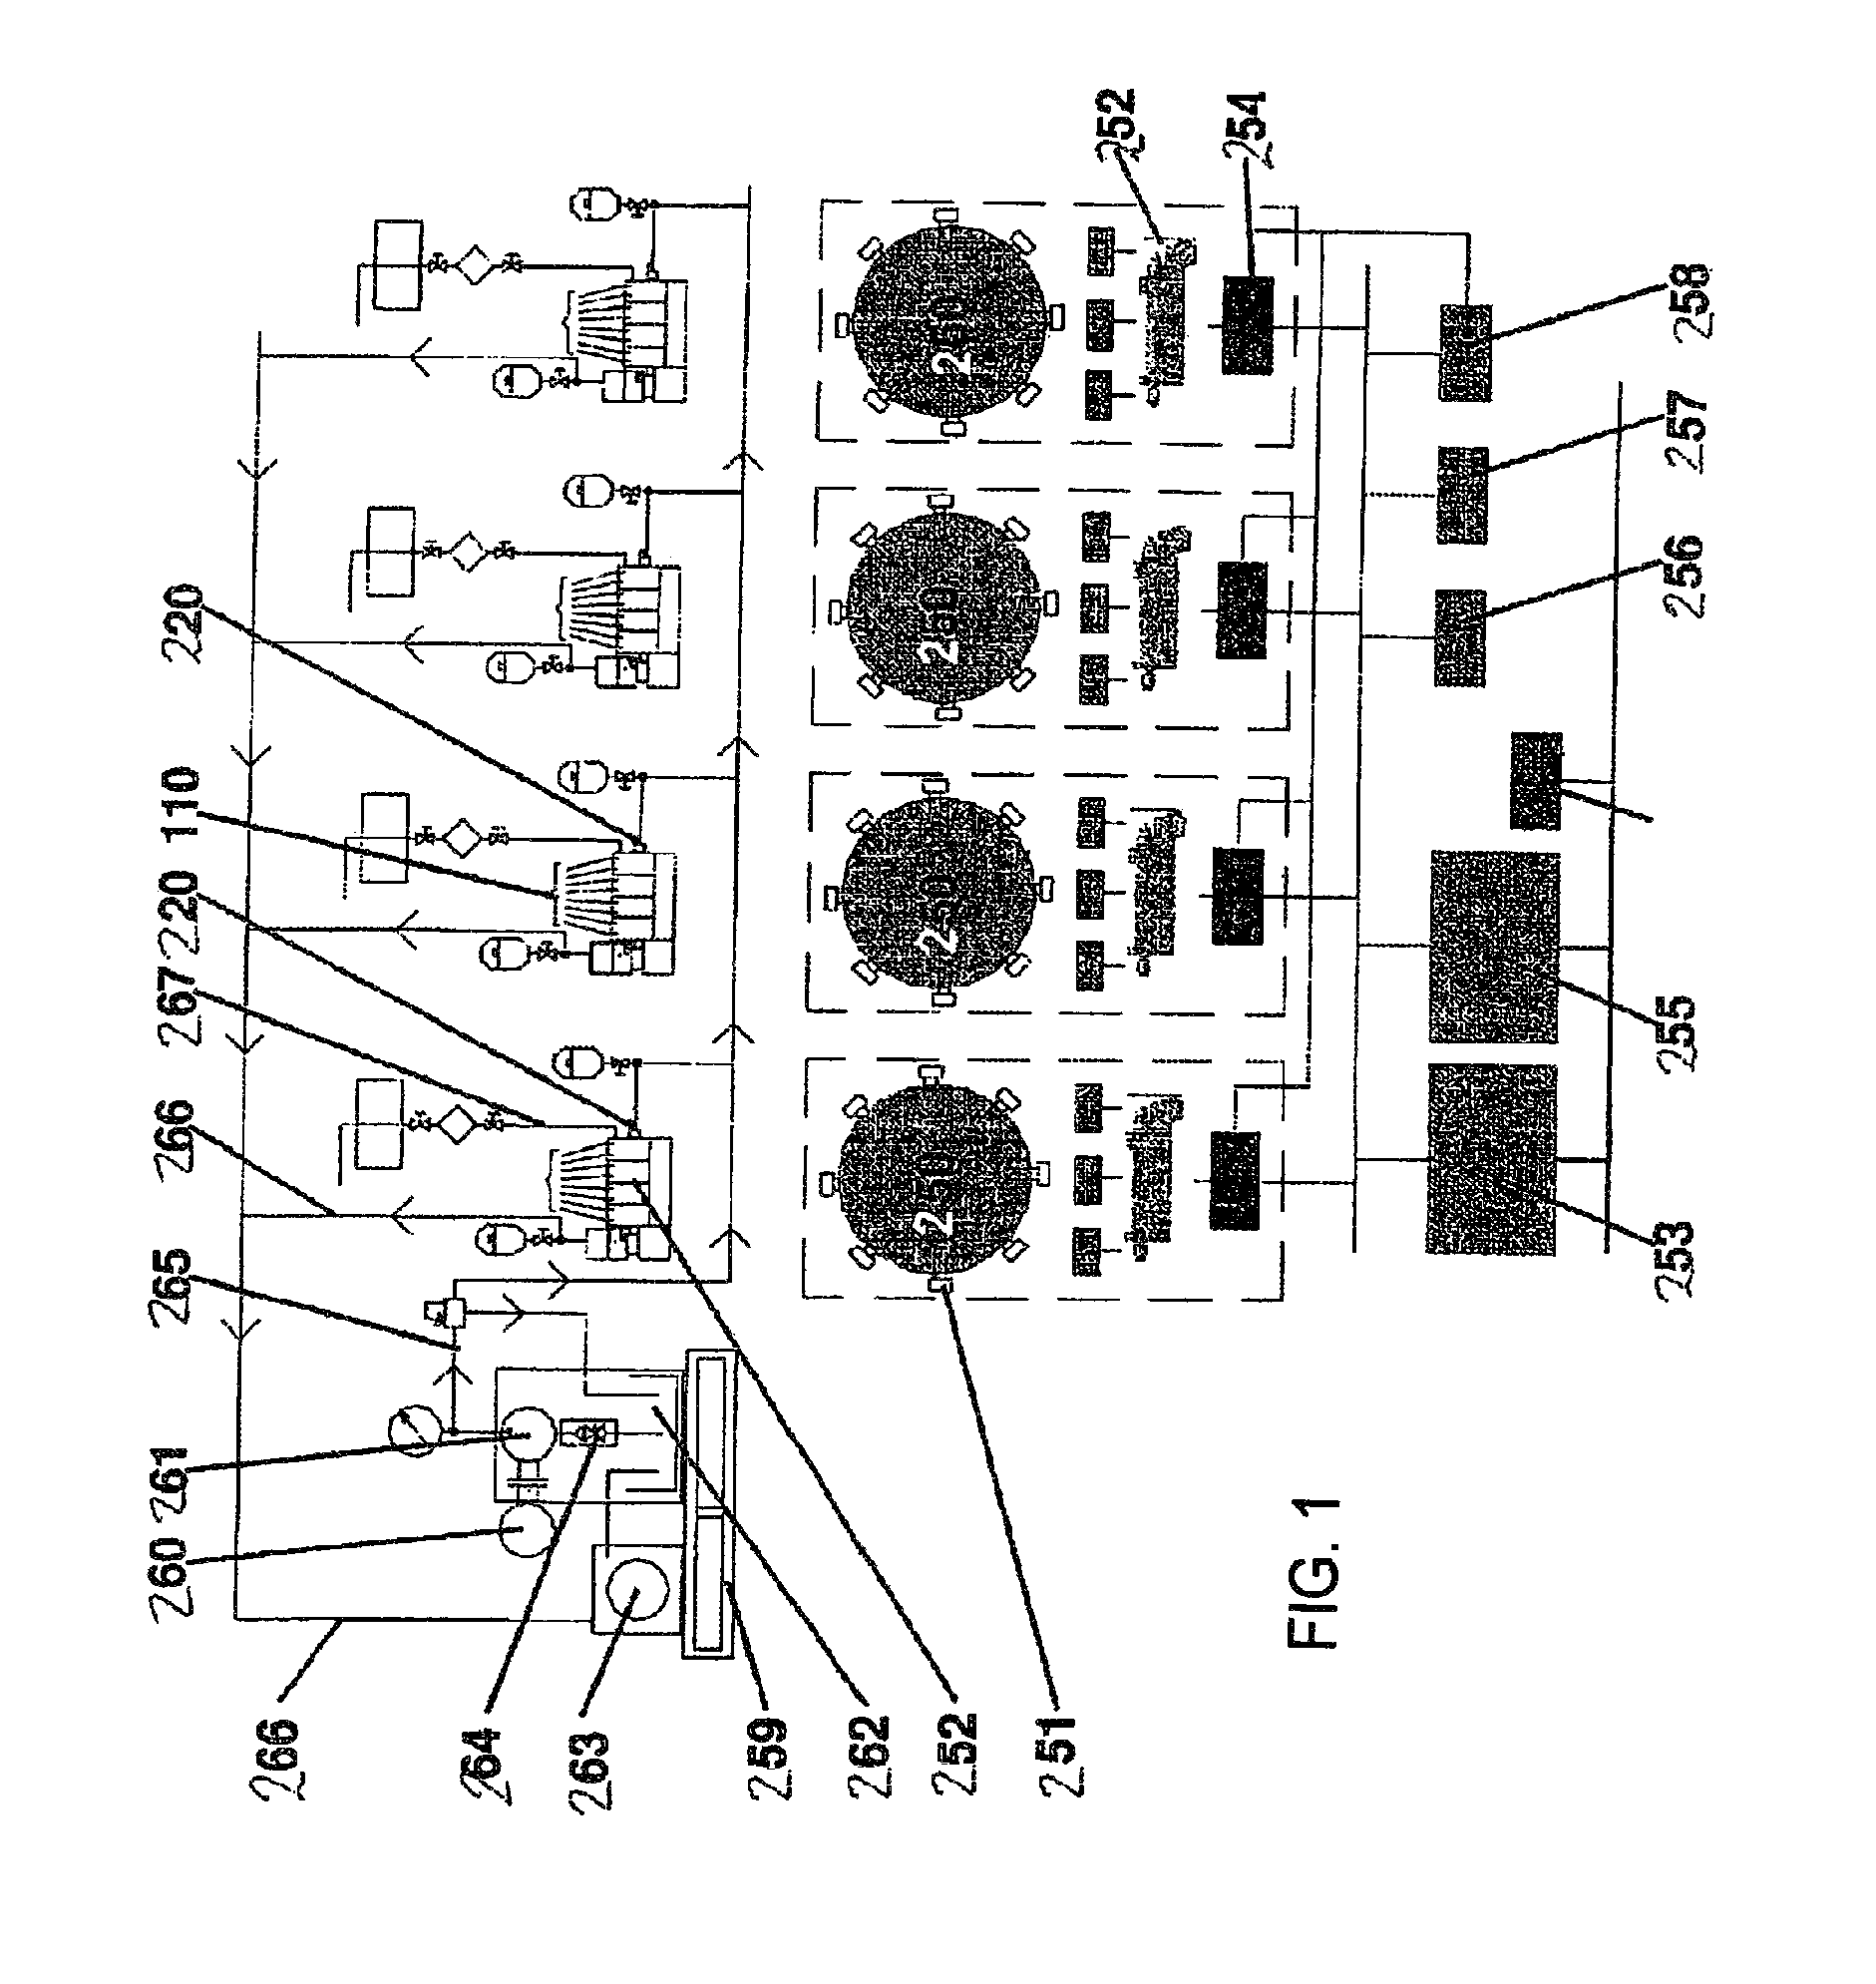 Lubricating apparatus and method for dosing cylinder lubrication oil